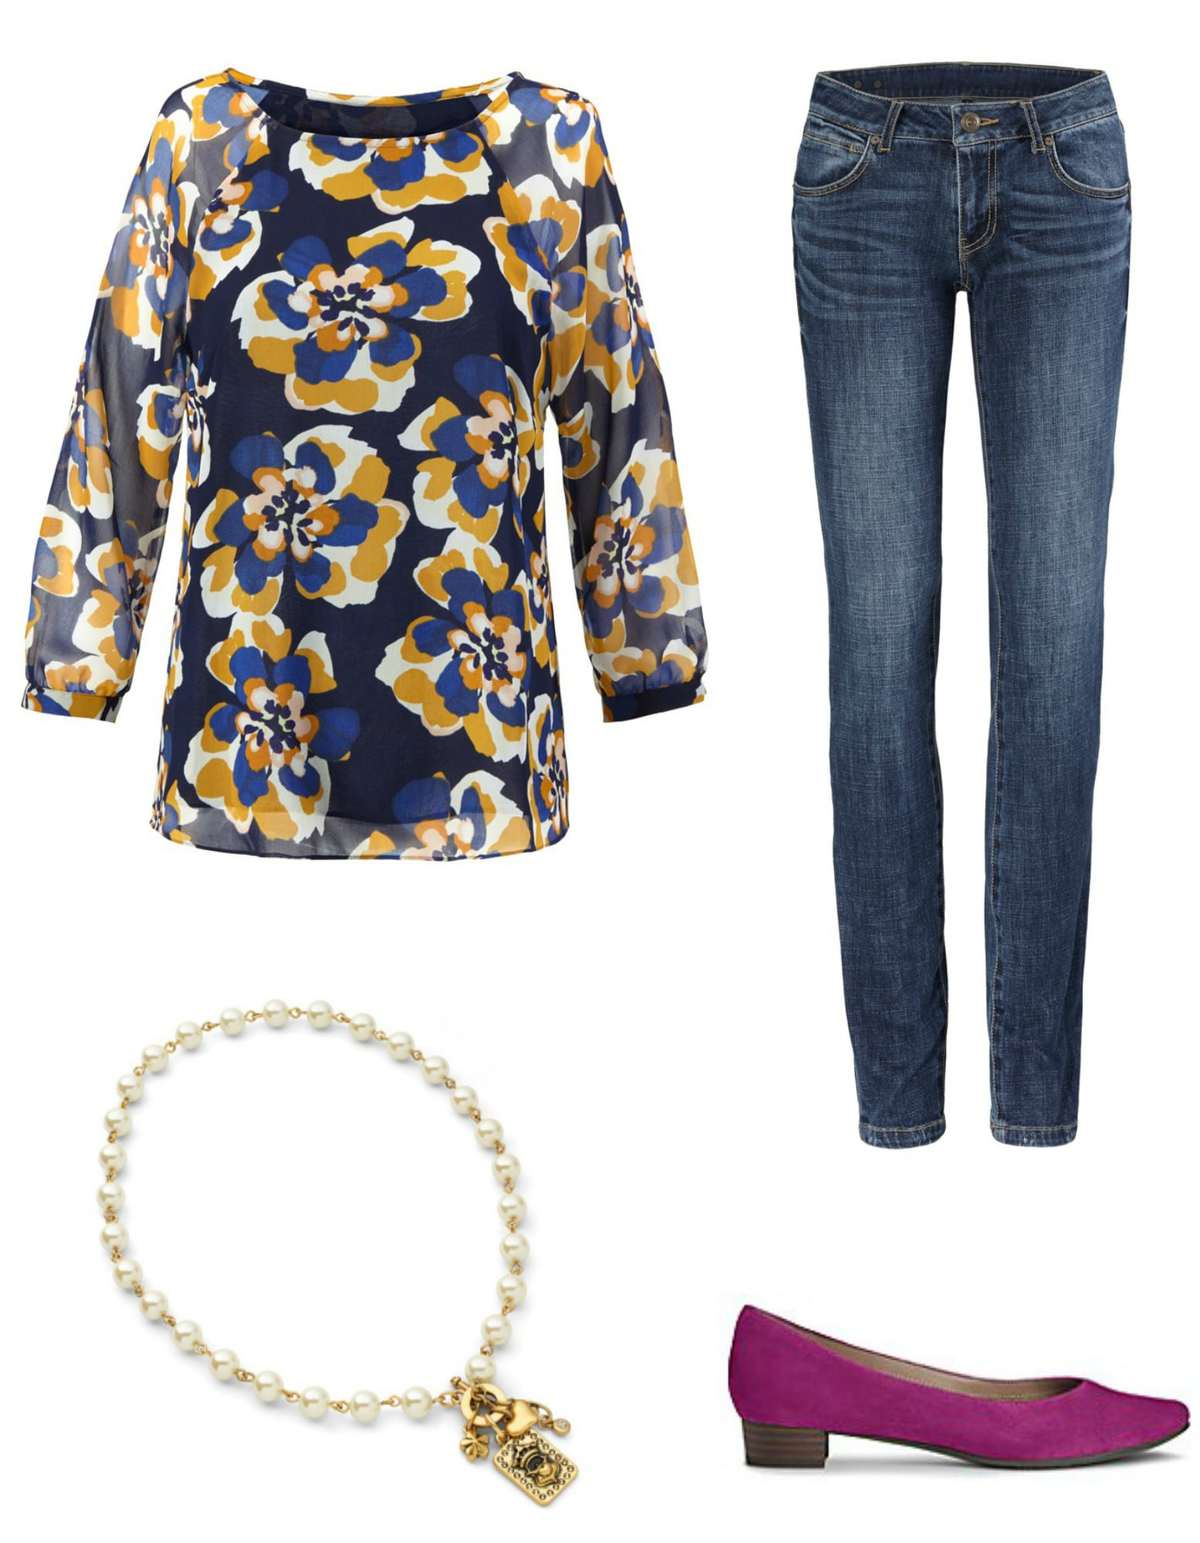 The cabi Lydia blouse styled for weekend with the cabi Dover Skinny jeans, Heritage necklace, and Aerosoles Subway pumps in purple suede.